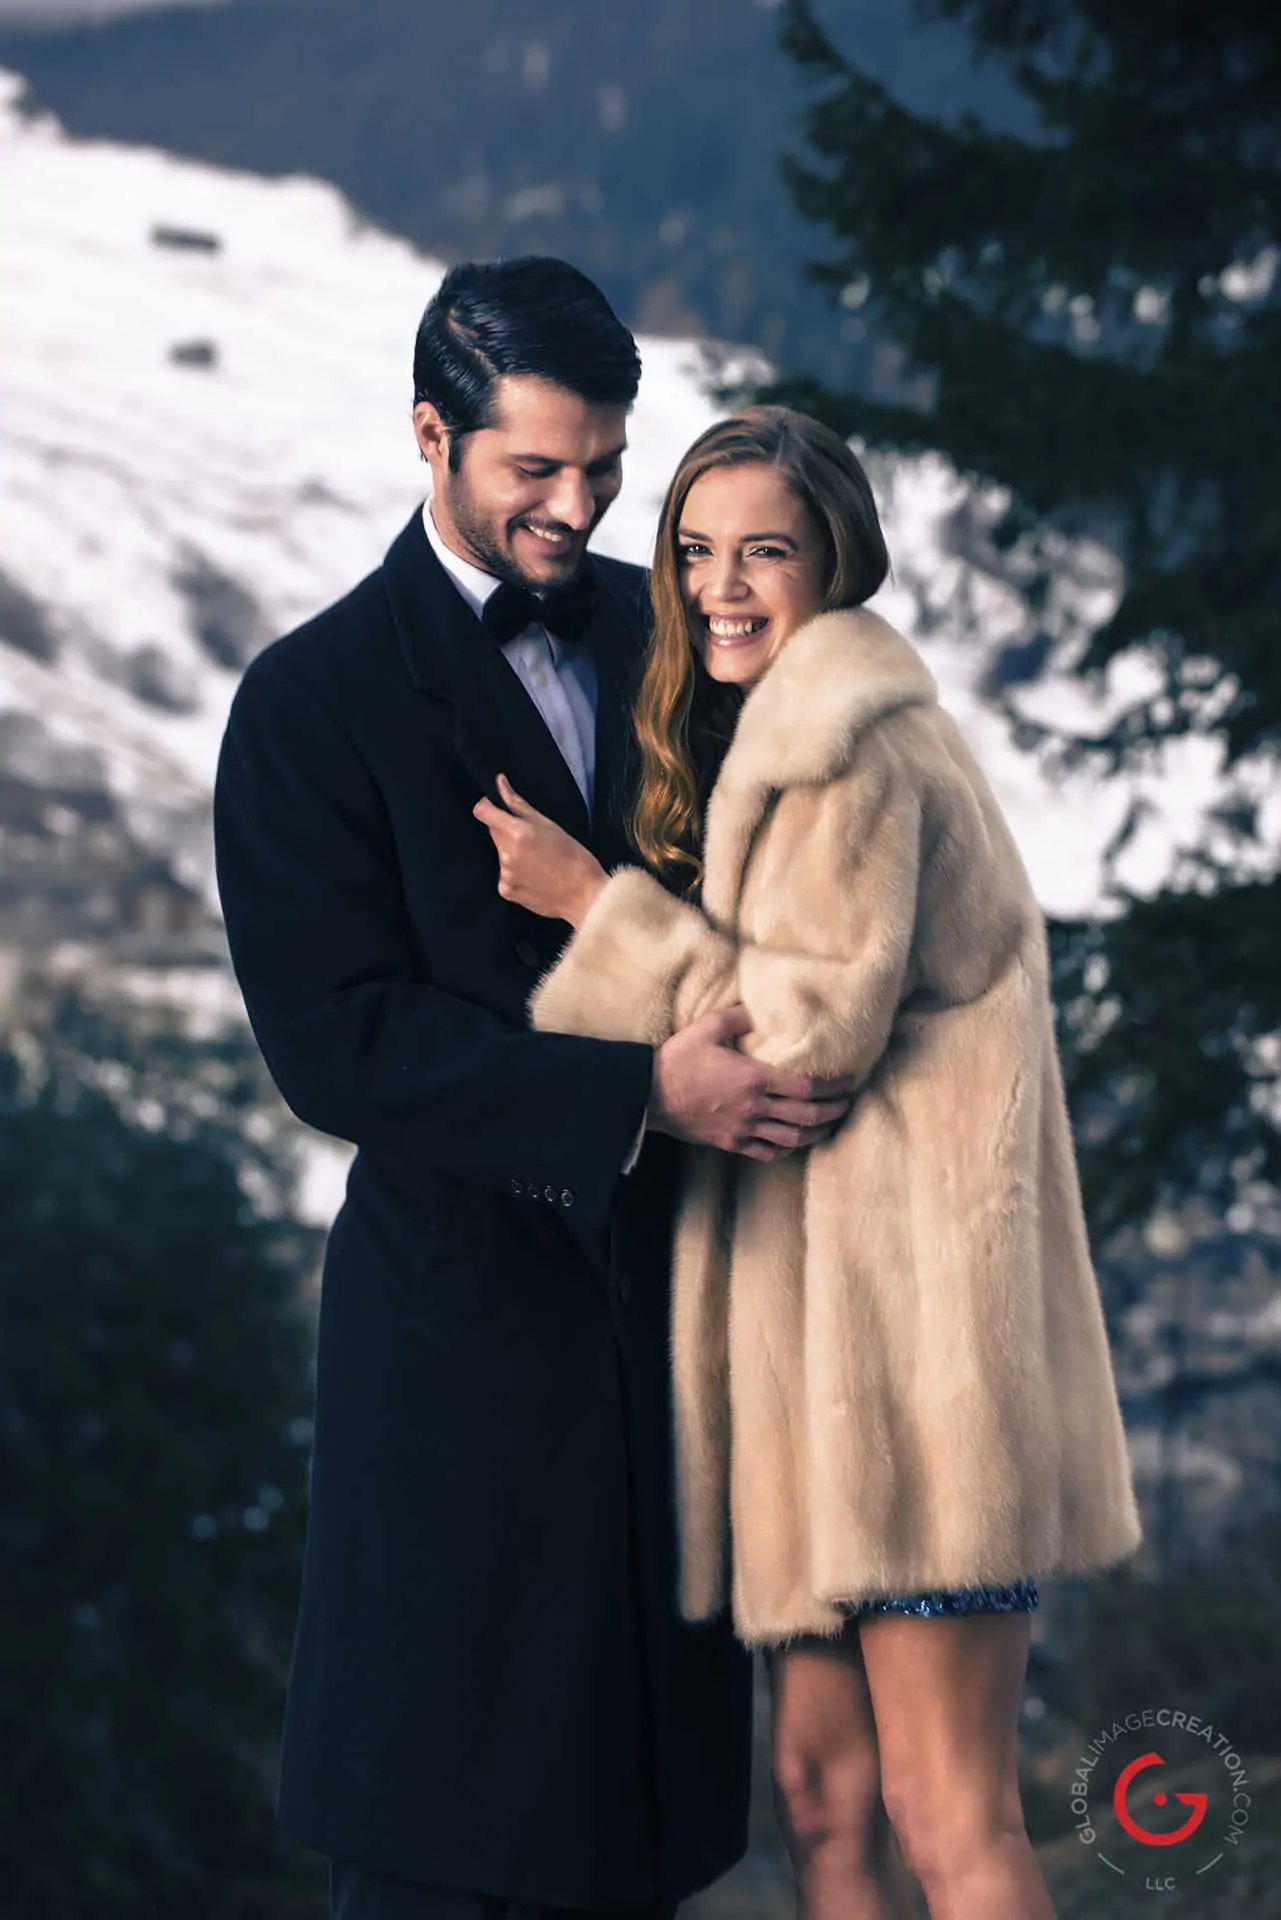 Well Dressed Couple Takes in The Fresh Winter Air in the Mountains - Professional Photographer Lifestyle Photography Wardrobe Stylist